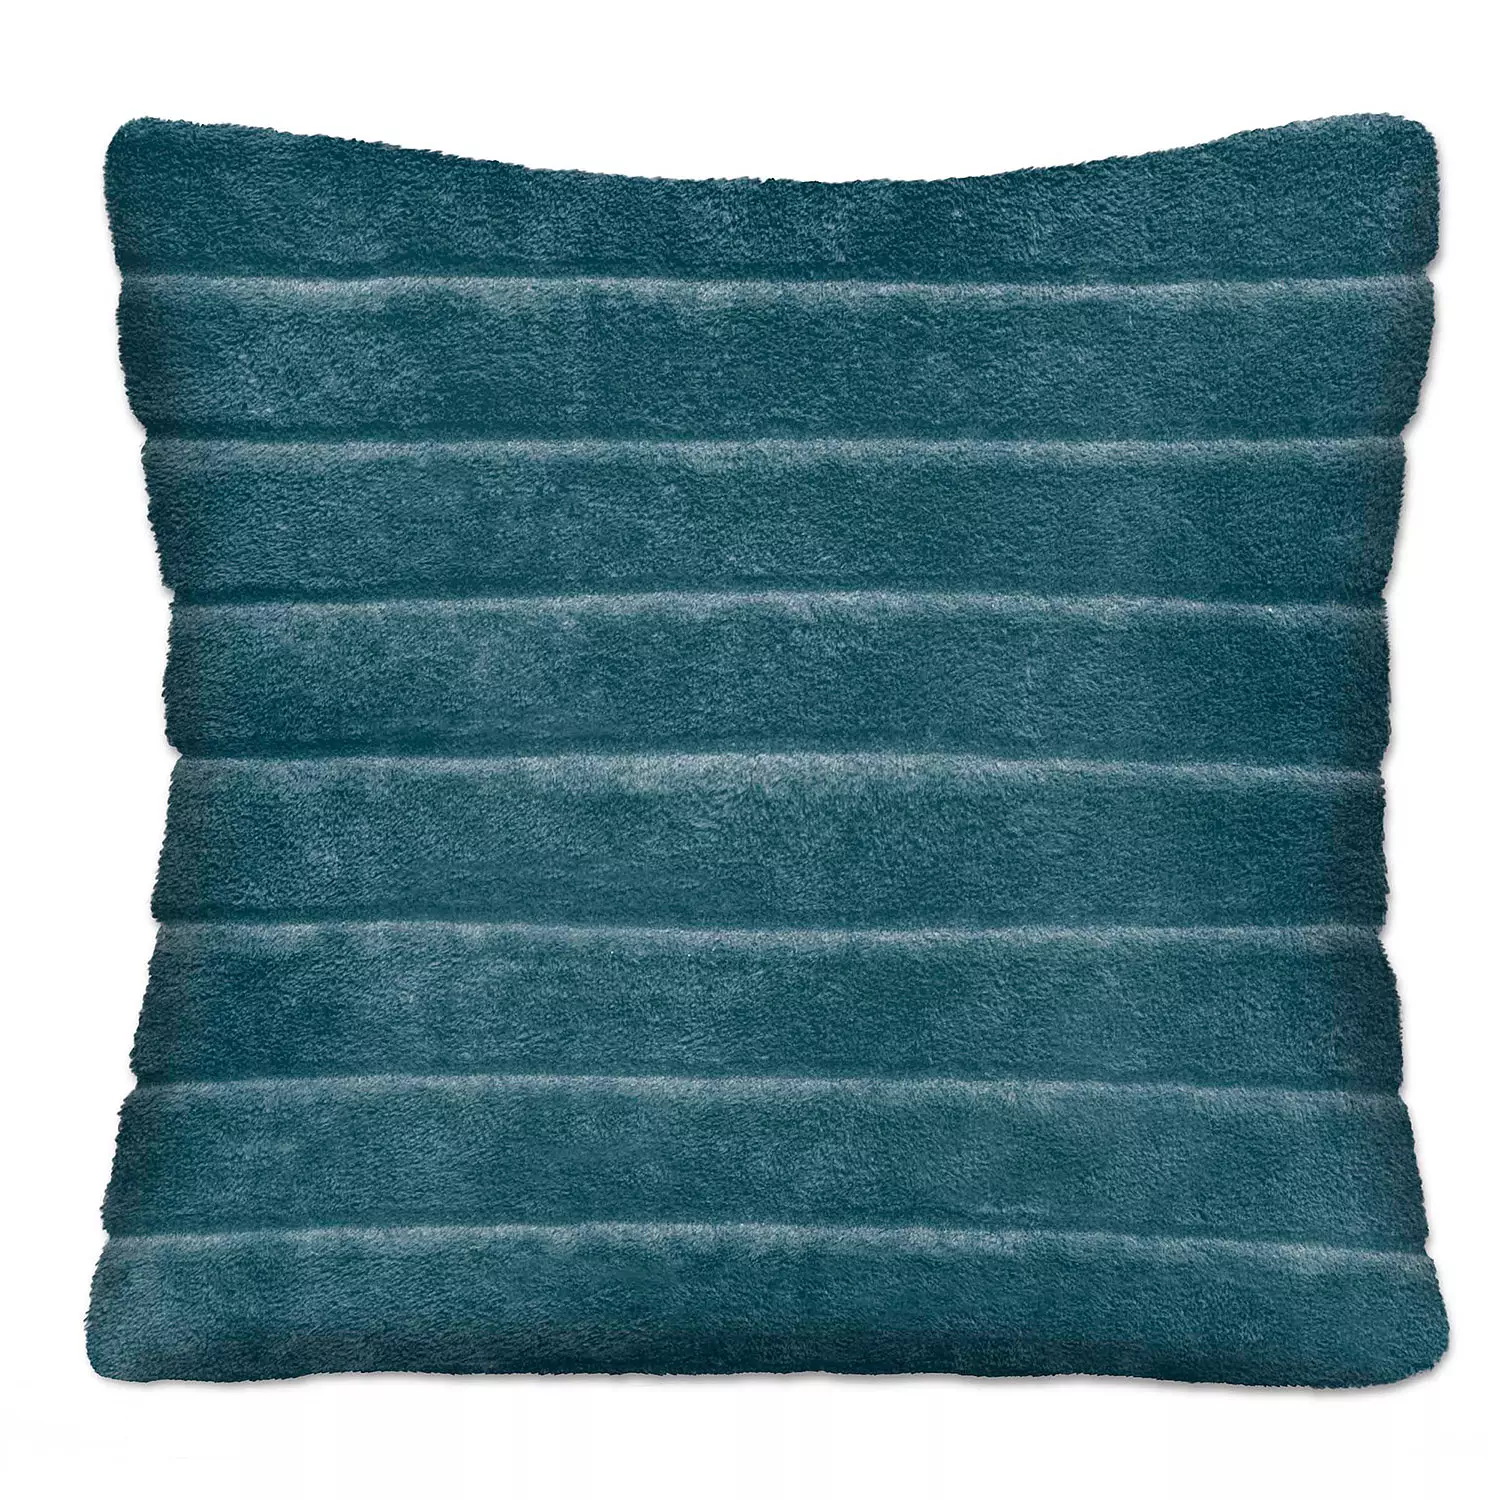 Faux fur decorative cushion with embossed stripes, 17"x17", teal